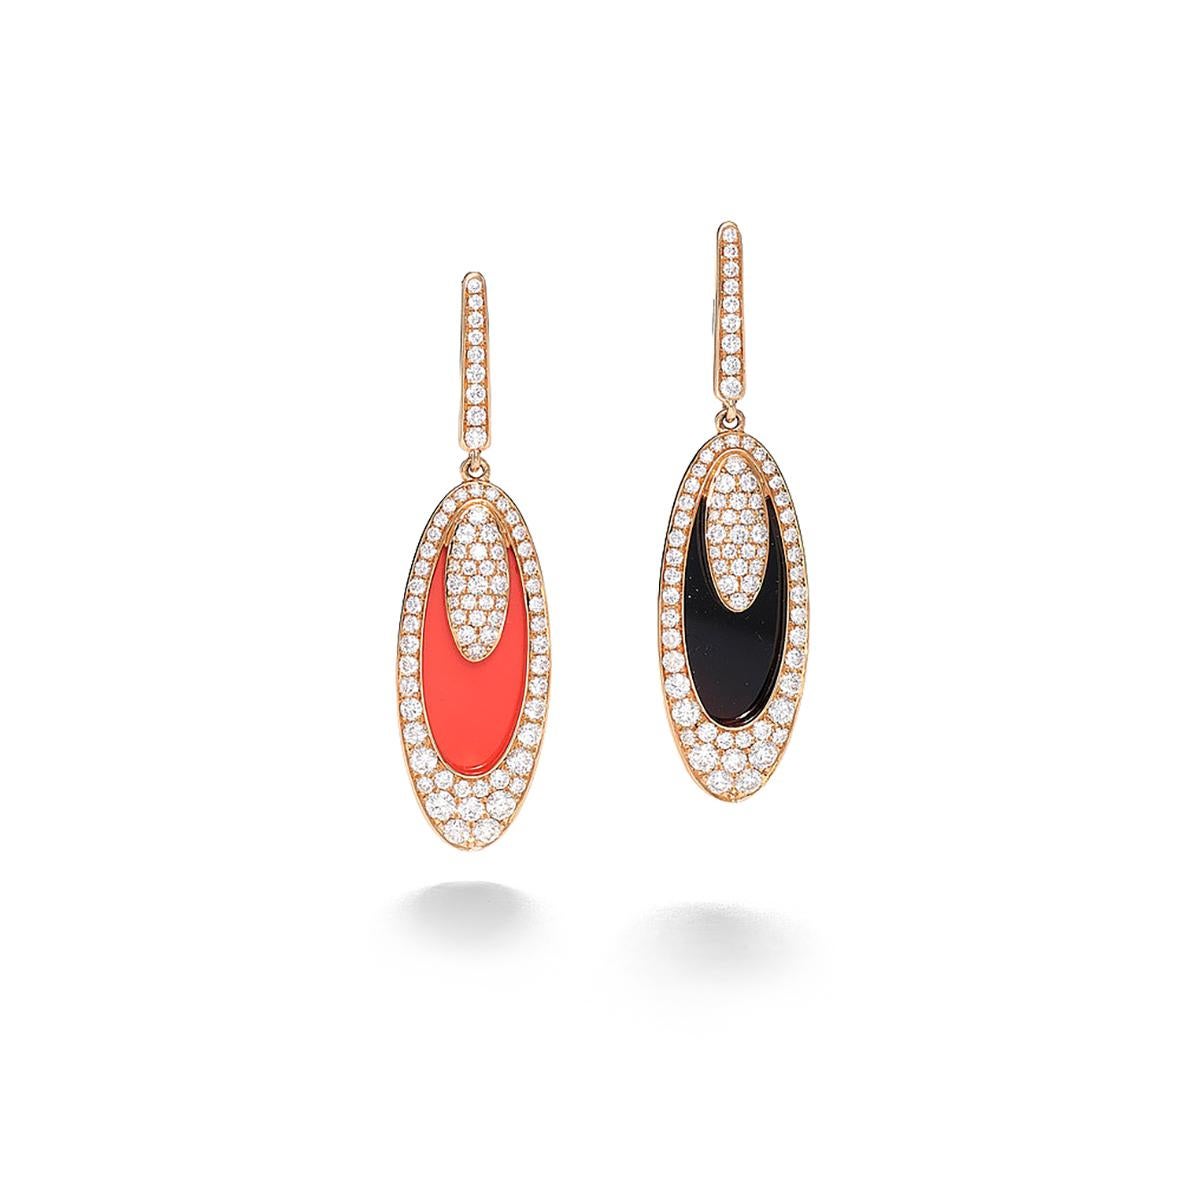 Contemporary Diamond Earrings with Onyx and Coral